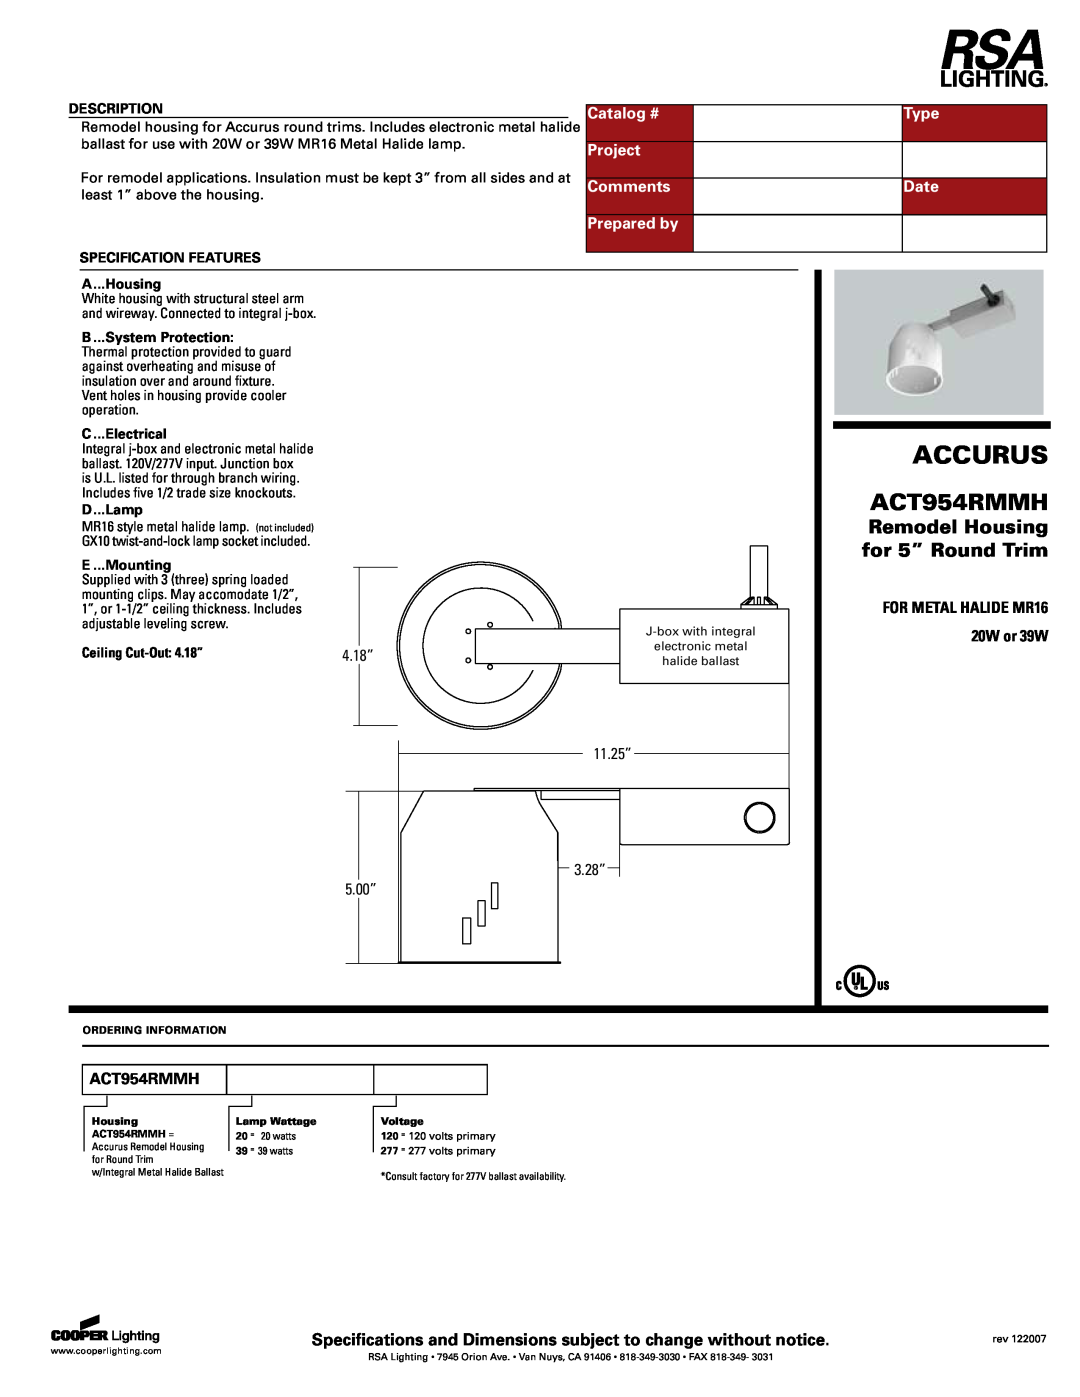 Cooper Lighting ACT954RMMH specifications Accurus, Remodel Housing, for 5” Round Trim, Catalog #, Type, Project, Comments 